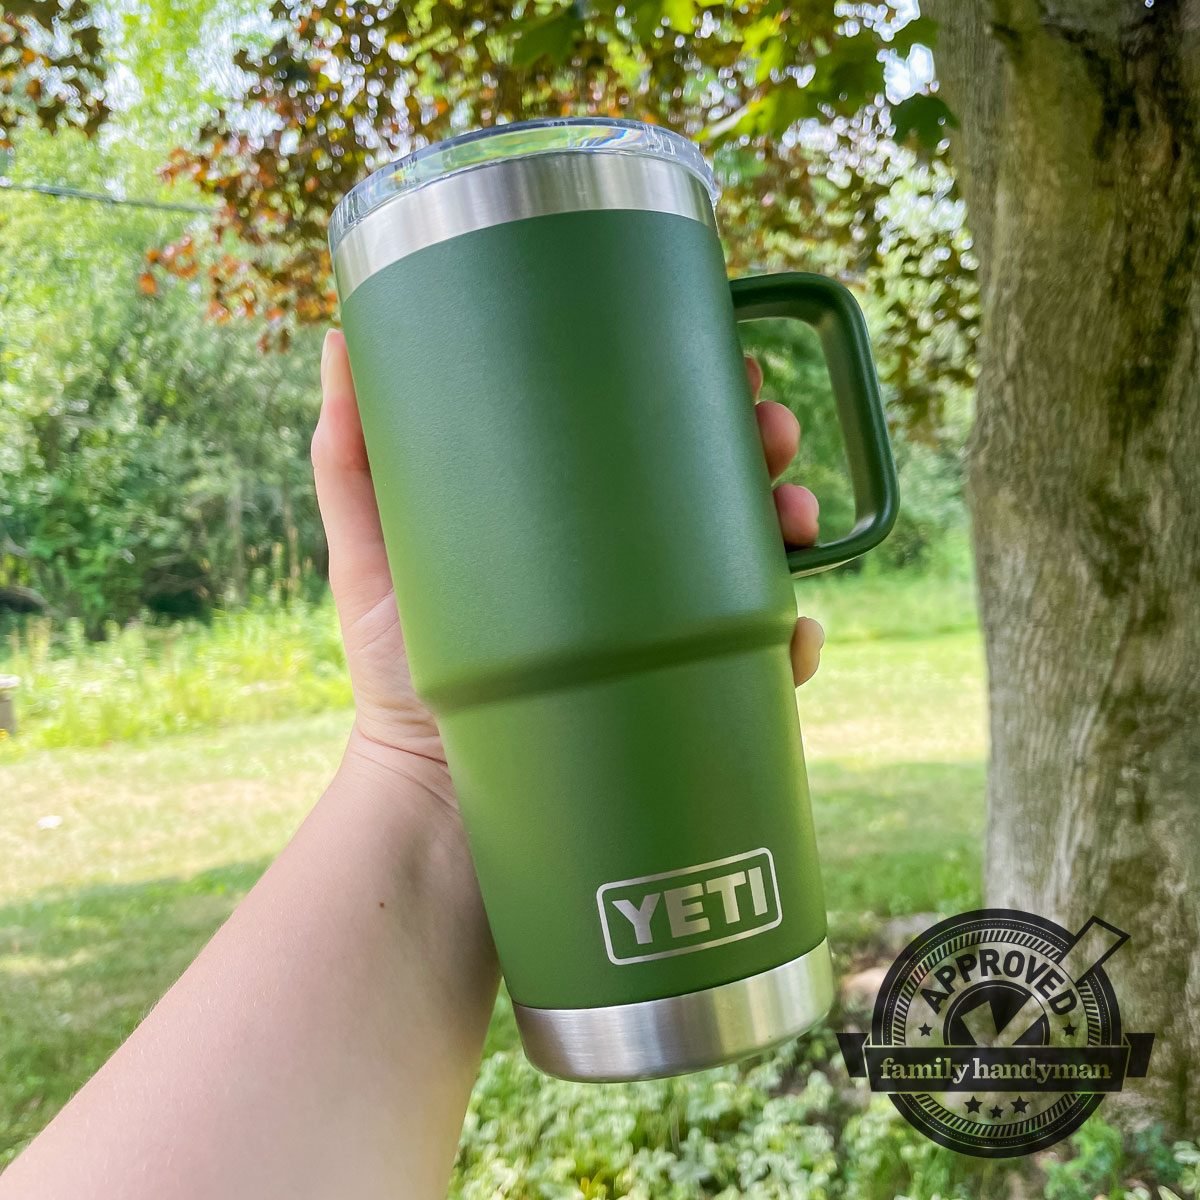 https://www.familyhandyman.com/wp-content/uploads/2023/08/FHM-The-9-Best-Yeti-Products-Our-Editors-Tested-and-Loved-Yeti-Rambler-30-Ounce-Travel-Mug-Mary-Henn-Family-Handyman-YETI-Rambler-30-Oz-Travel-Mug_KSedit.jpg?fit=700%2C700